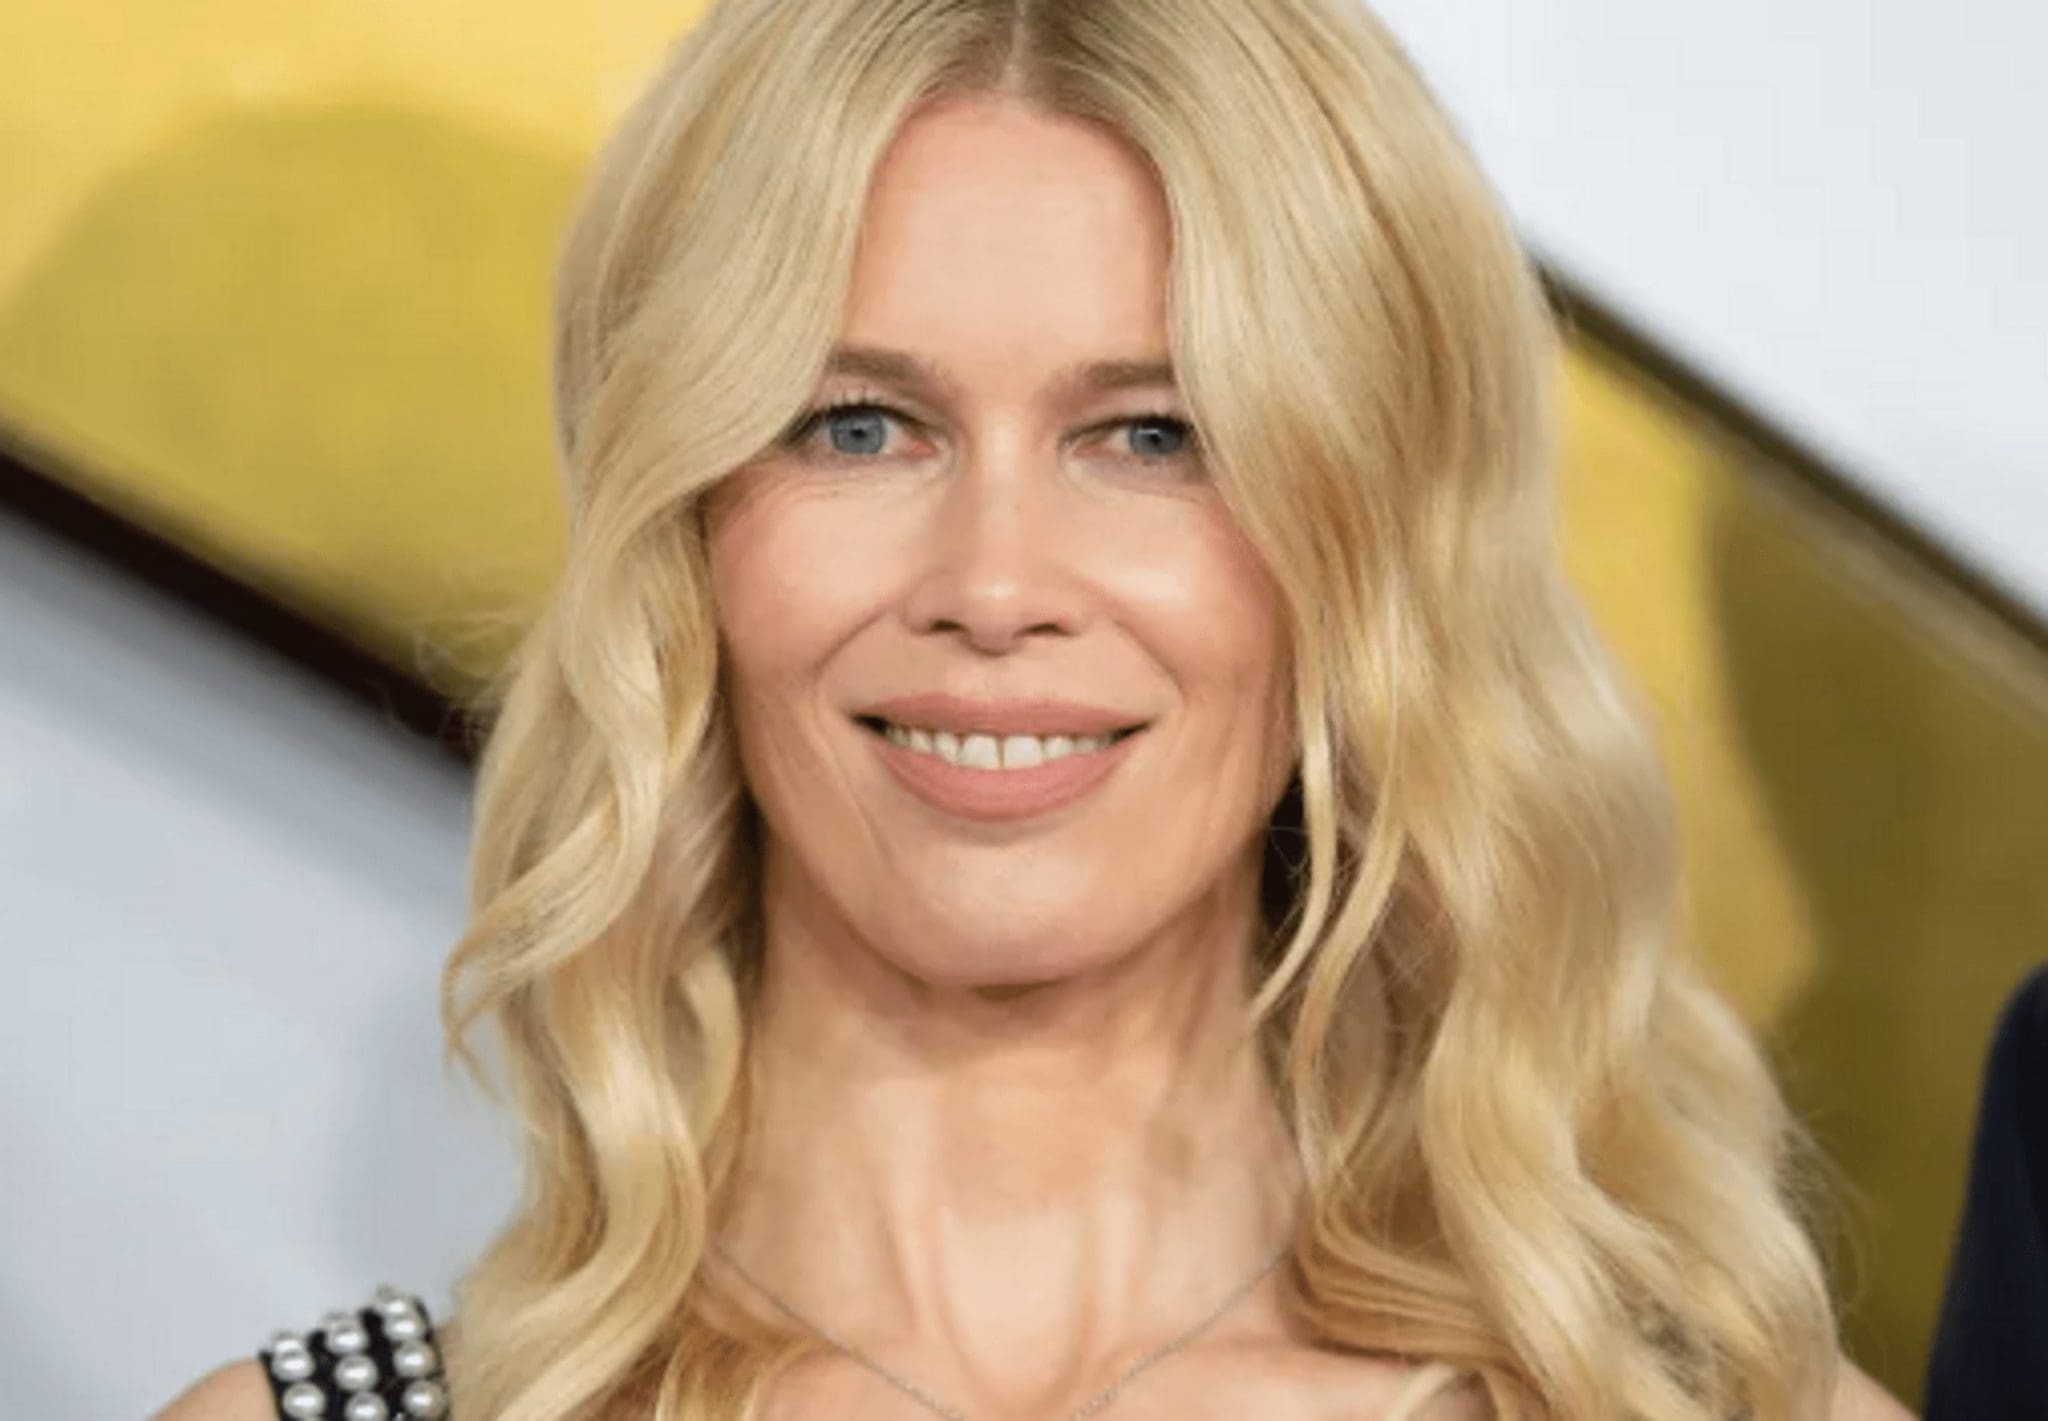 How Claudia Schiffer Maintains Her Supermodel Body and Posture at 51